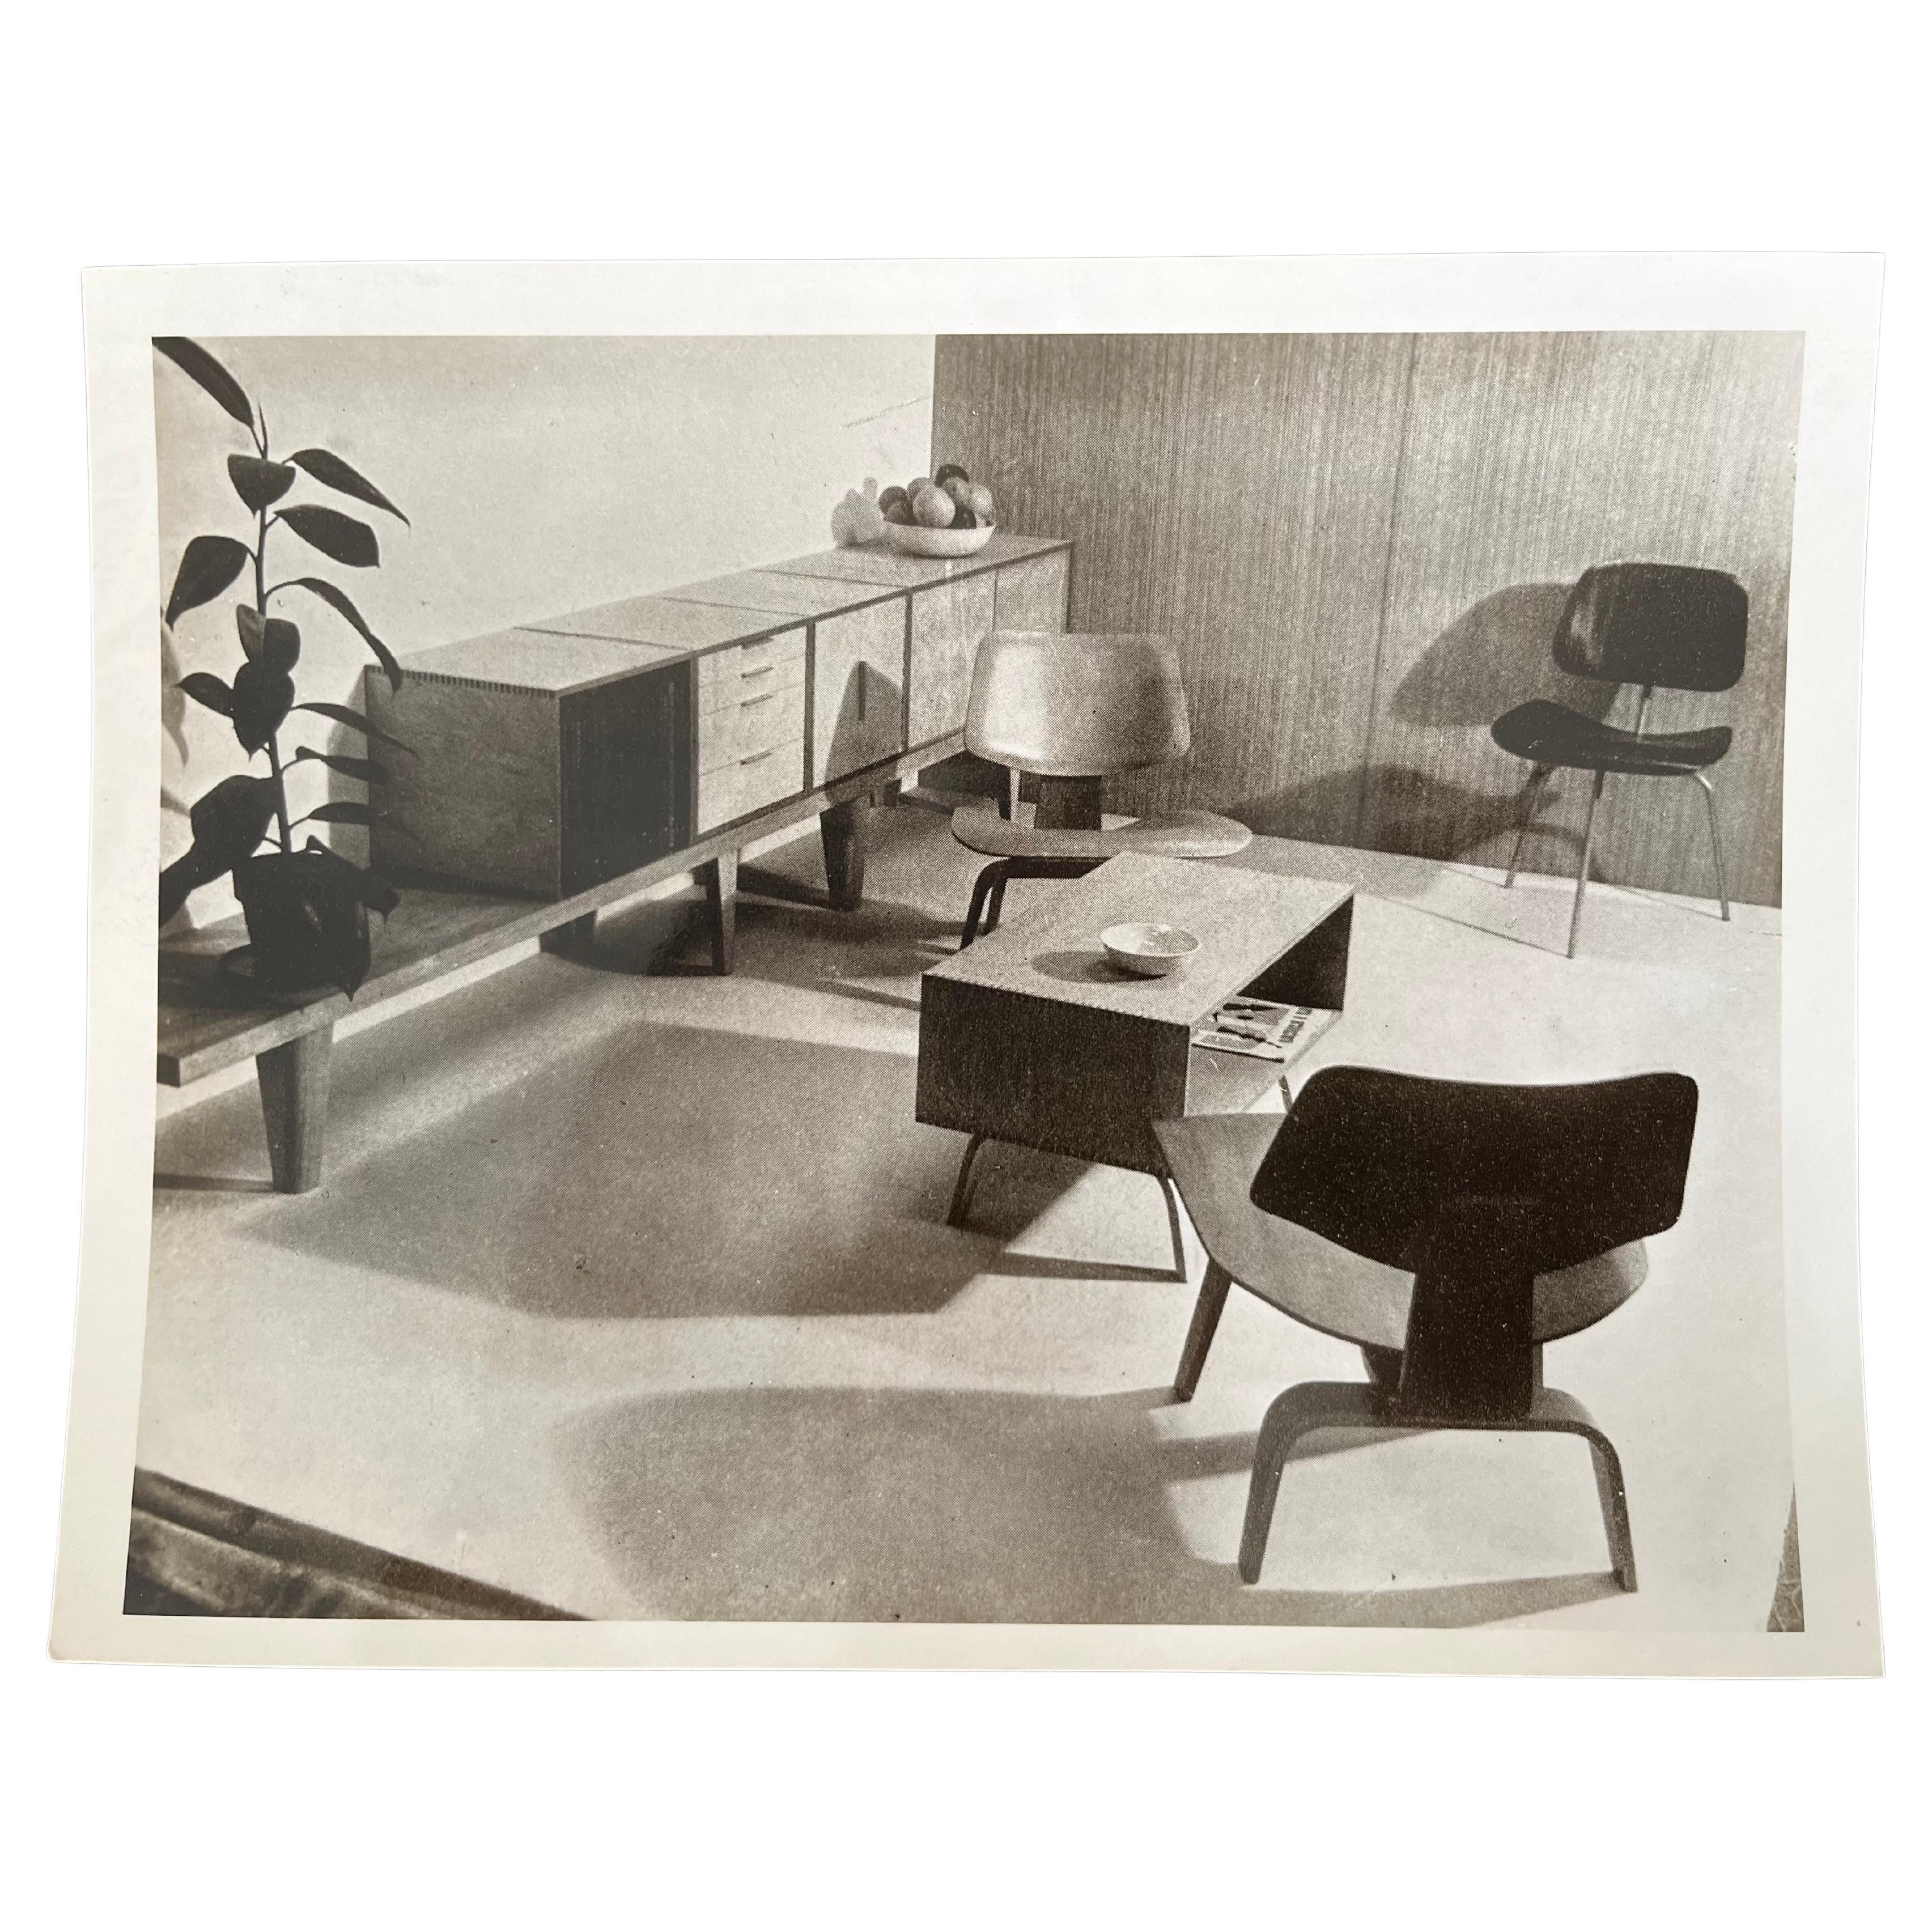 Original Photo of furniture/interior by Charles Eames, USA - 1950